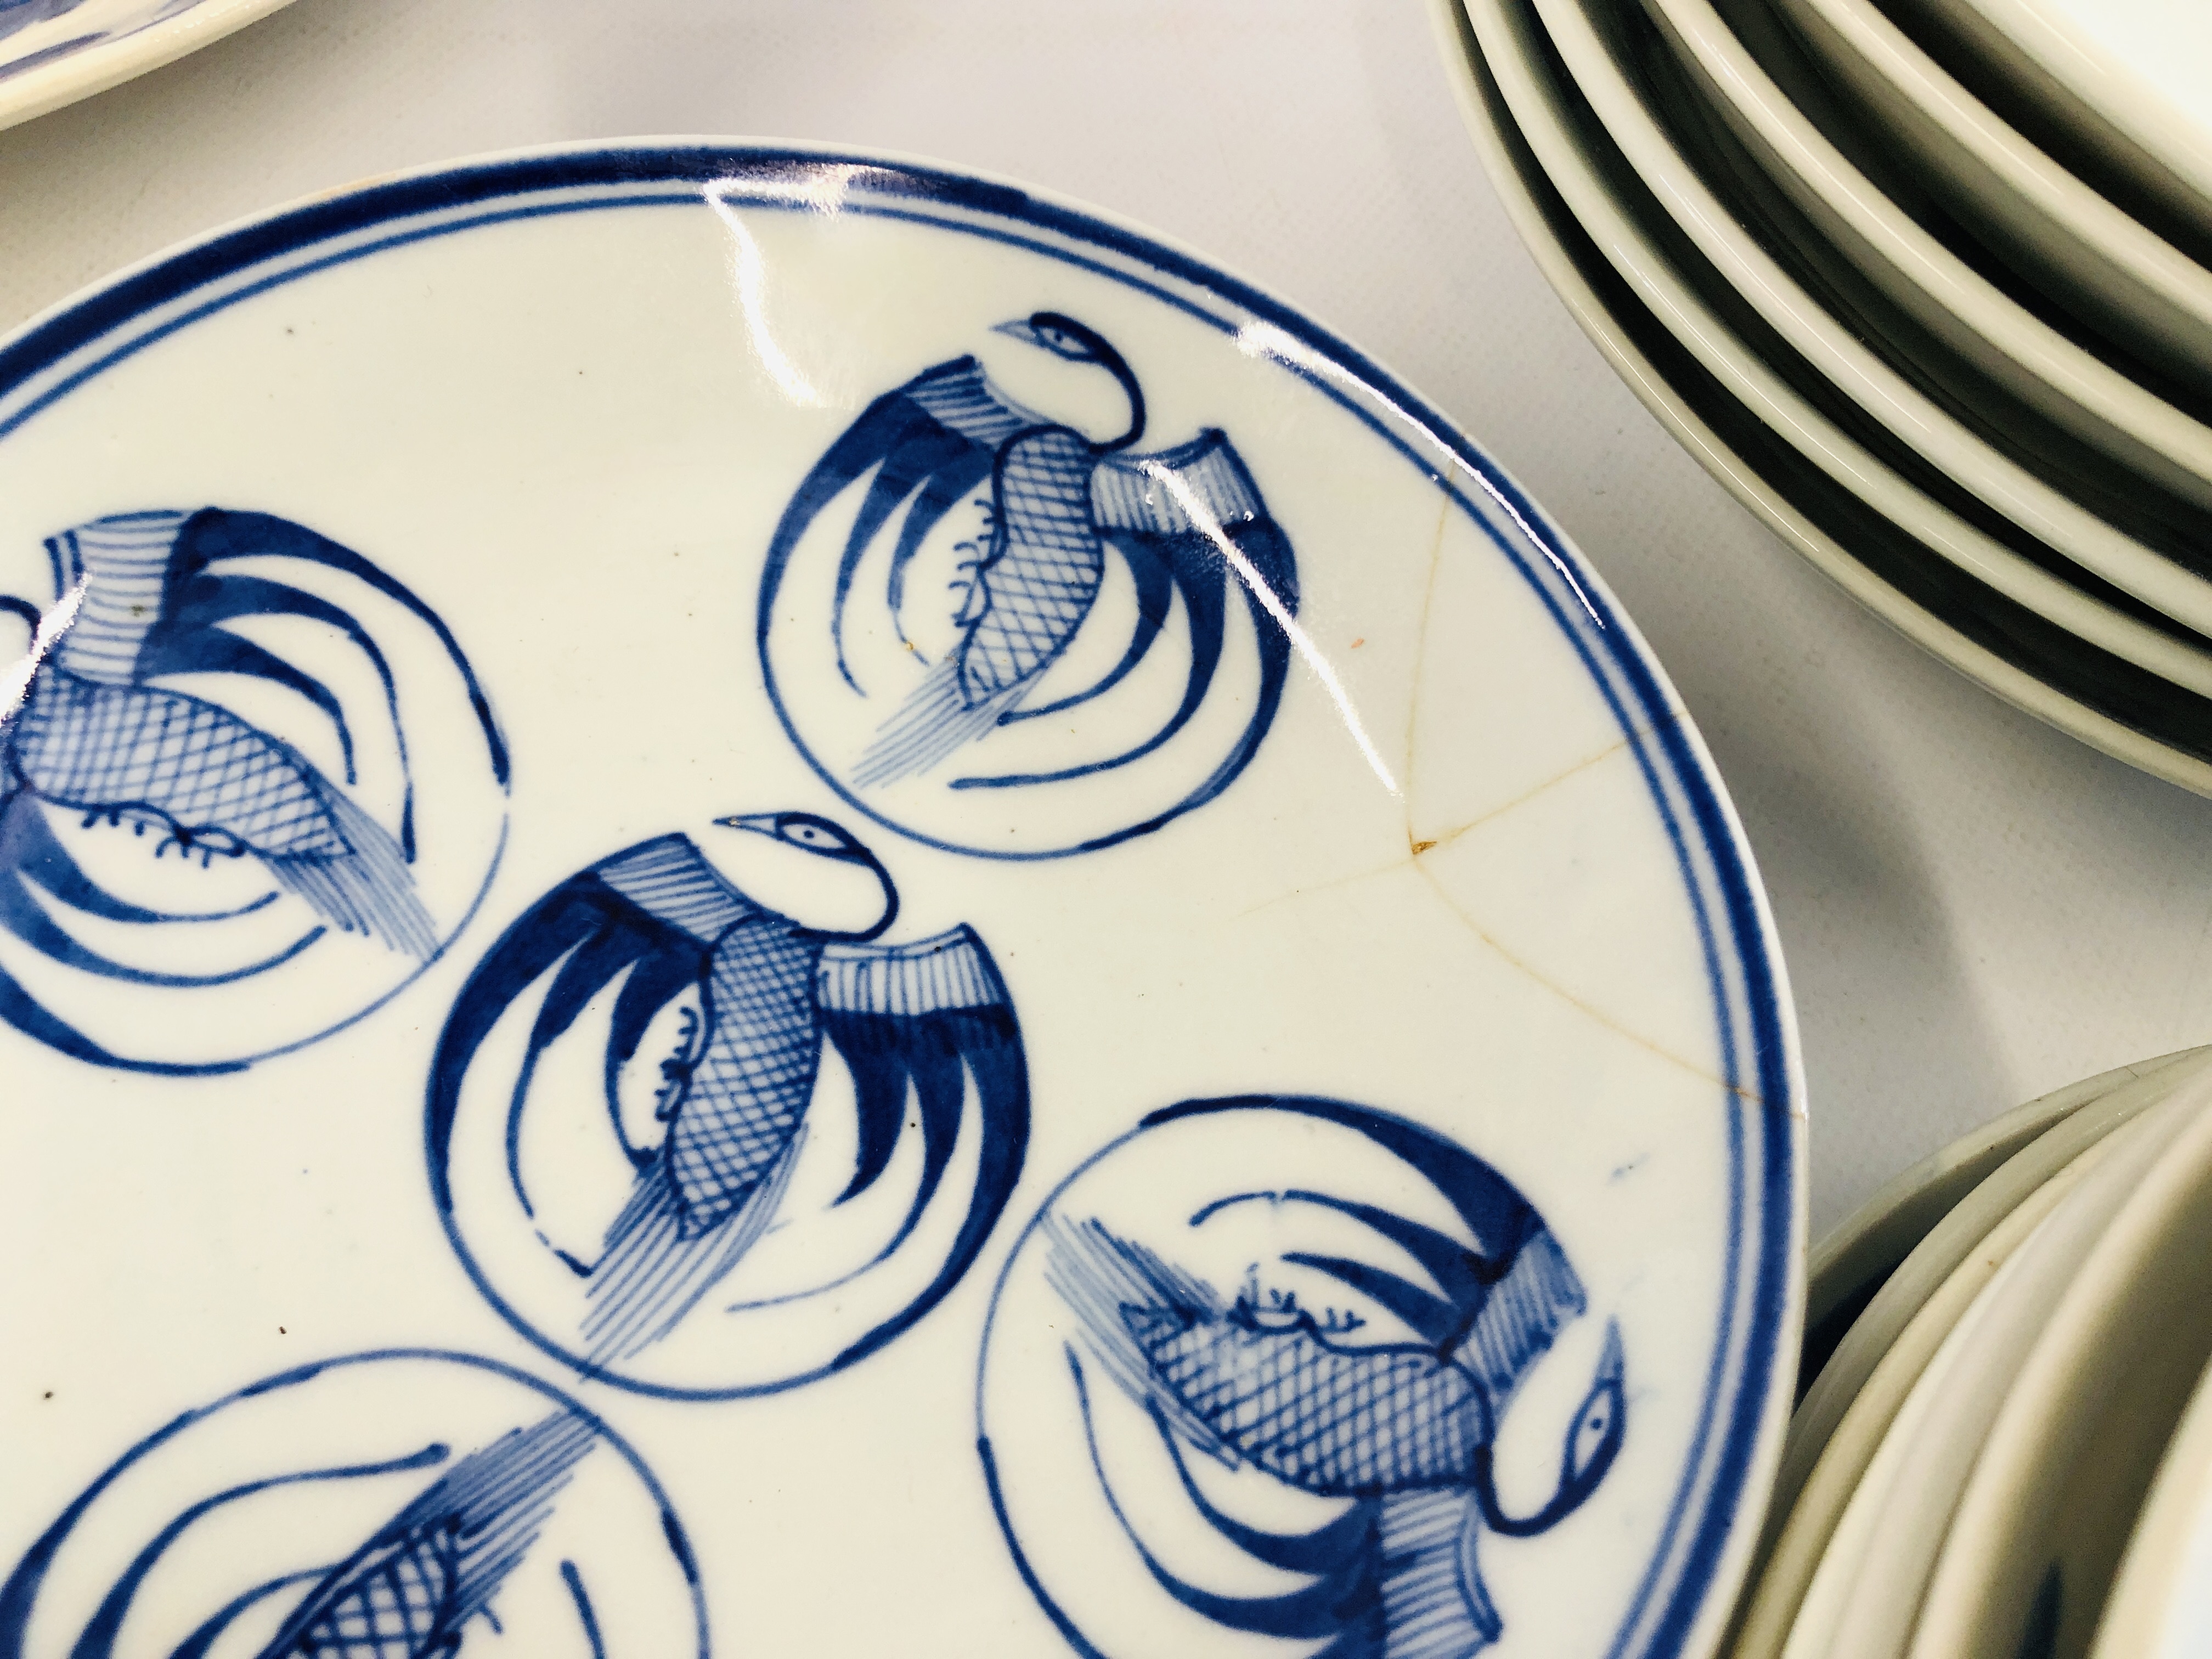 A GROUP OF CHINESE BLUE AND WHITE PLATES AND DISHES DECORATED WITH A FISH SYMBOL ALONG WITH A - Image 6 of 14